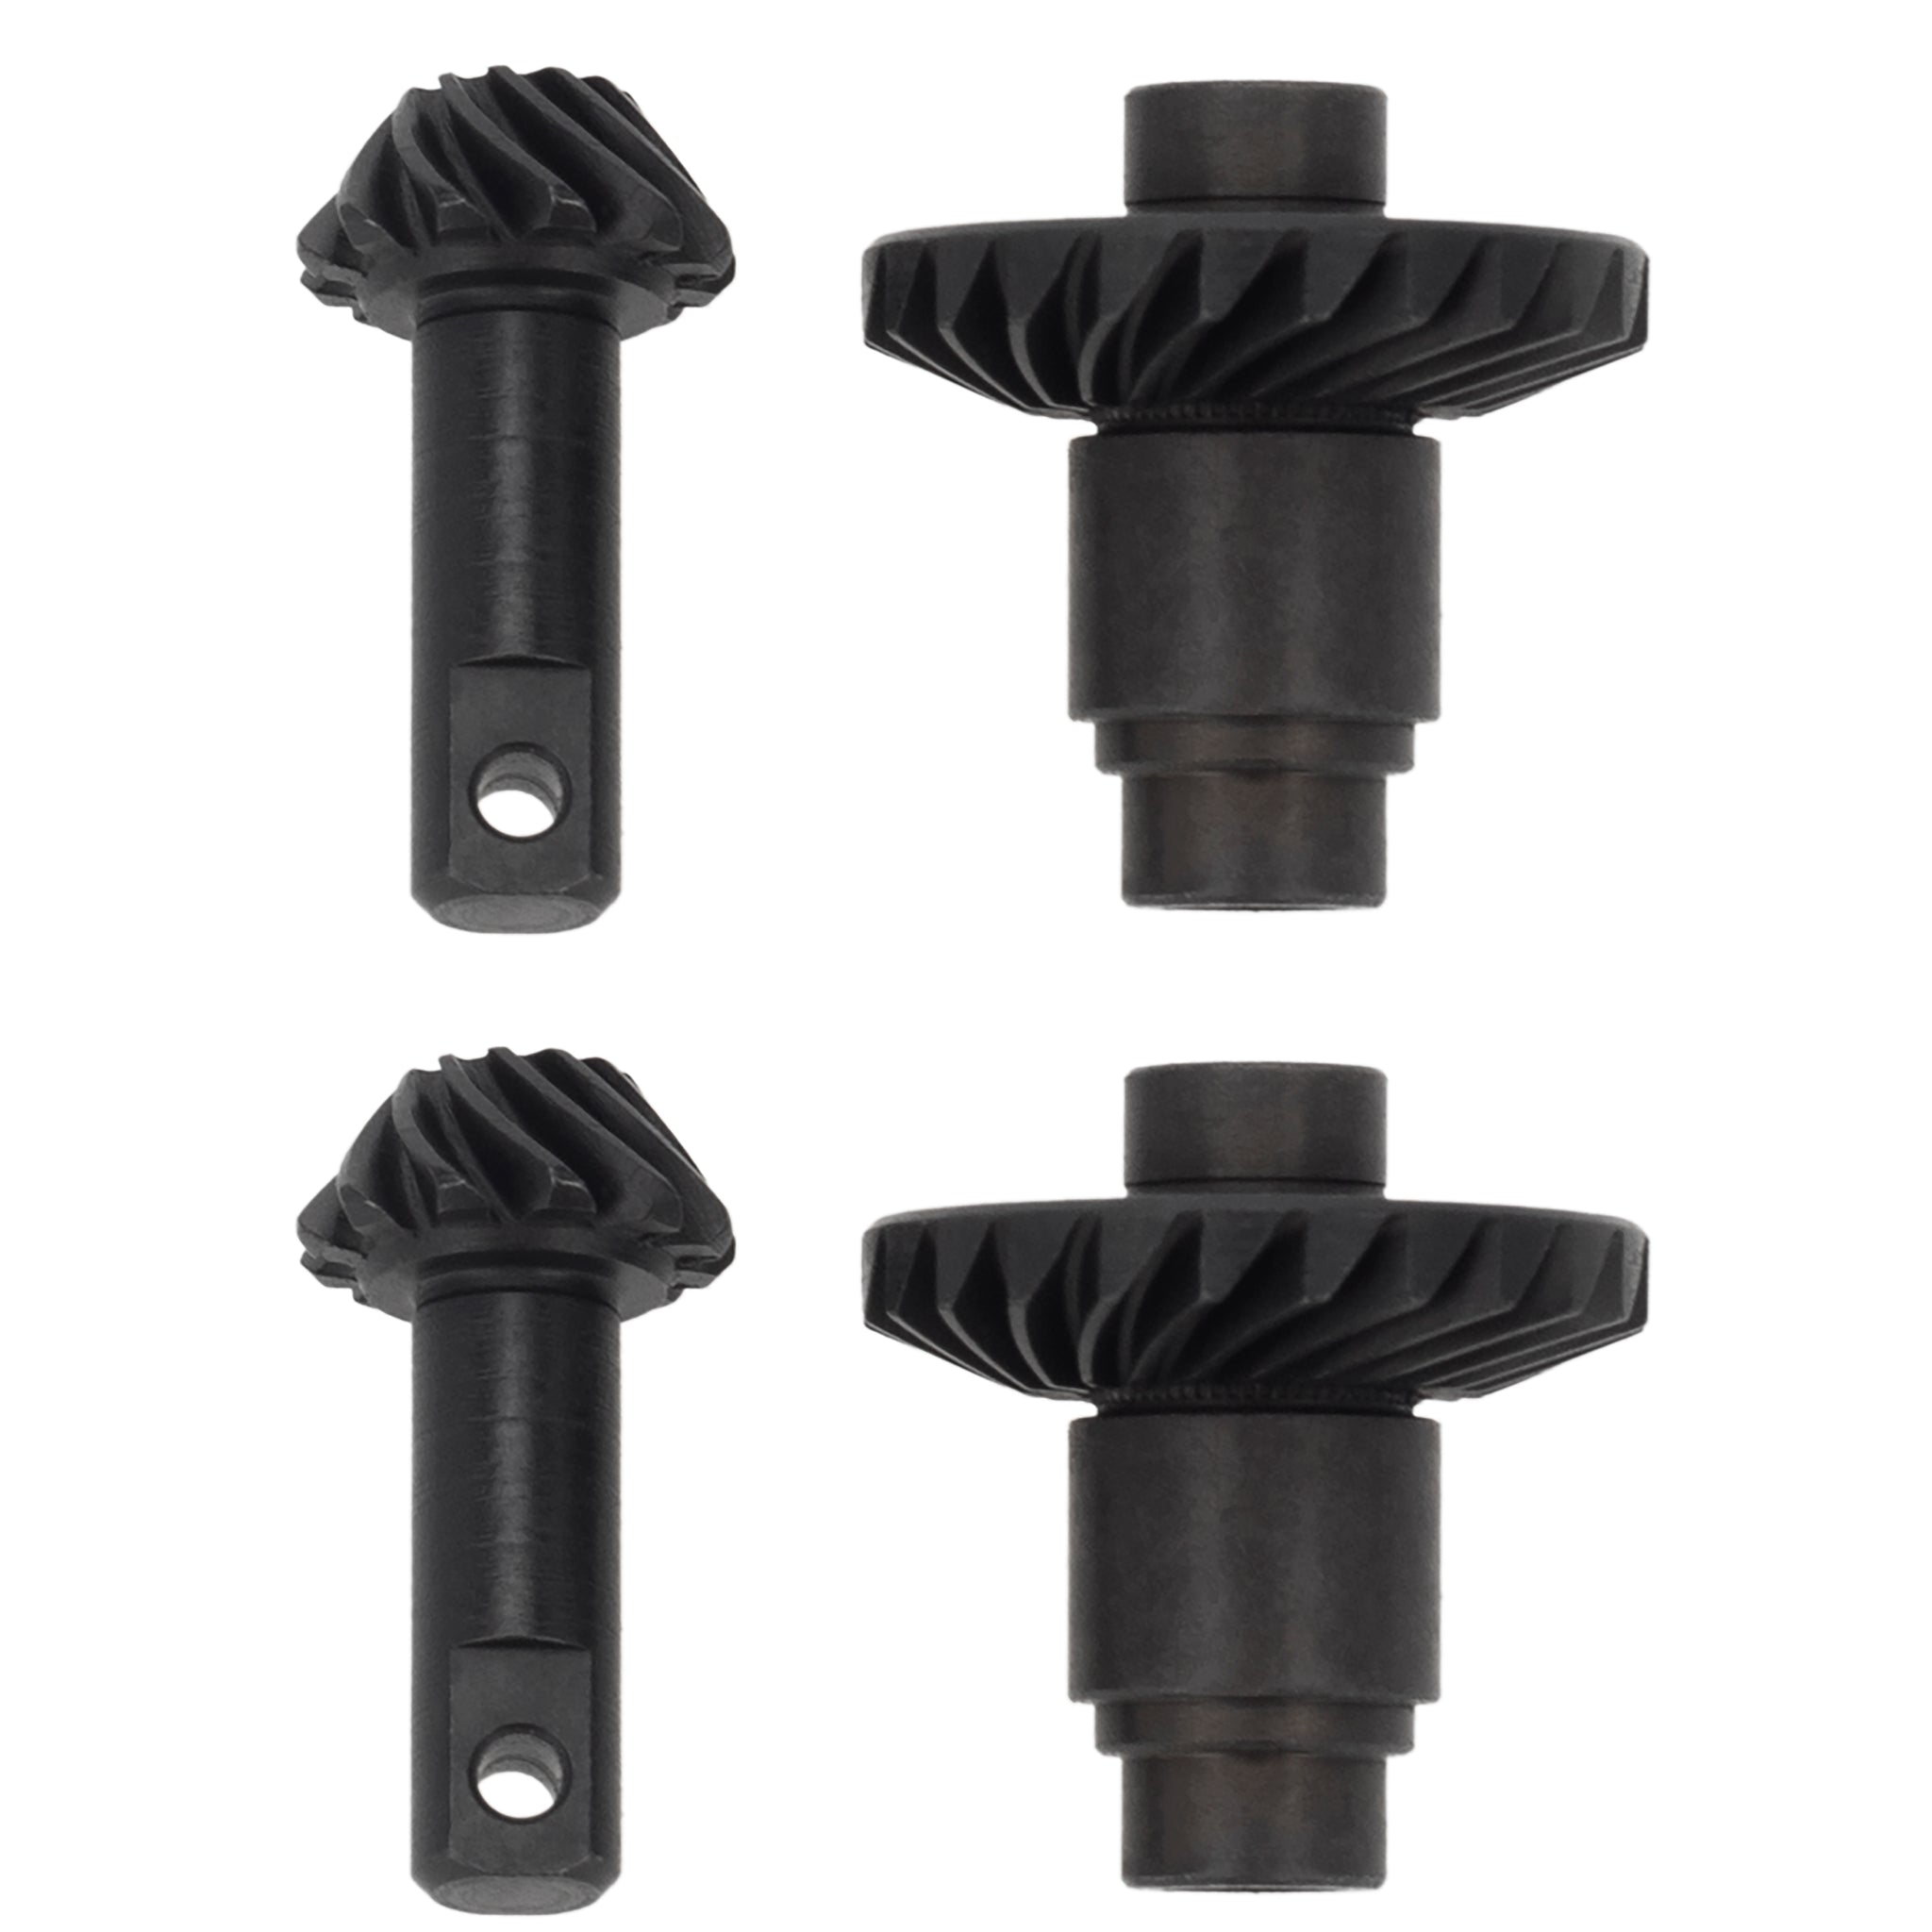 2 PACK 12-22T Helical Gear for TRX4M